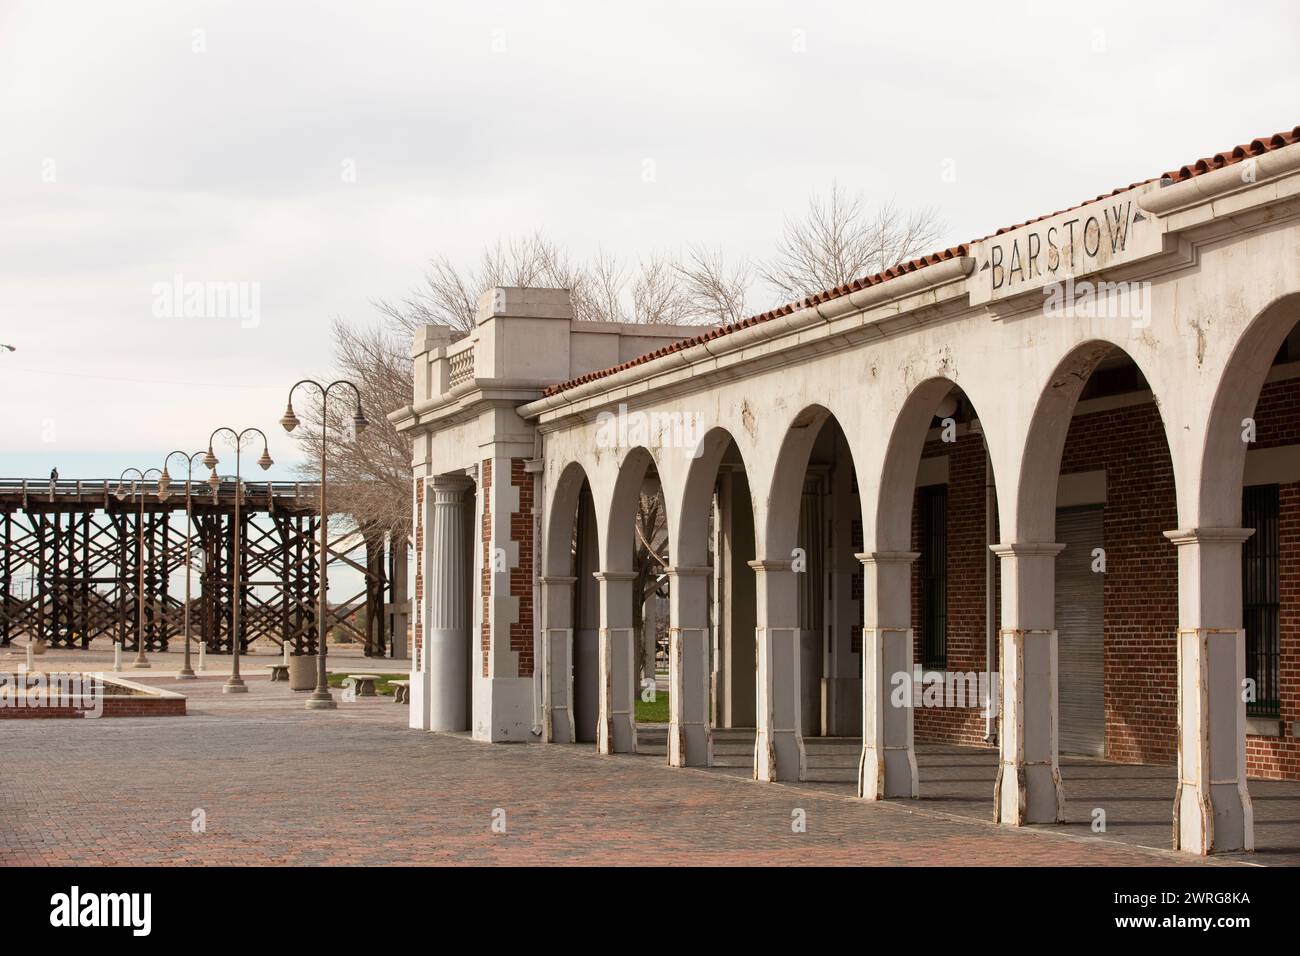 Barstow, California, USA - June 20, 2020:  Afternoon sun shines on the historic Casa Del Desierto, a Harvey House train station. Stock Photo